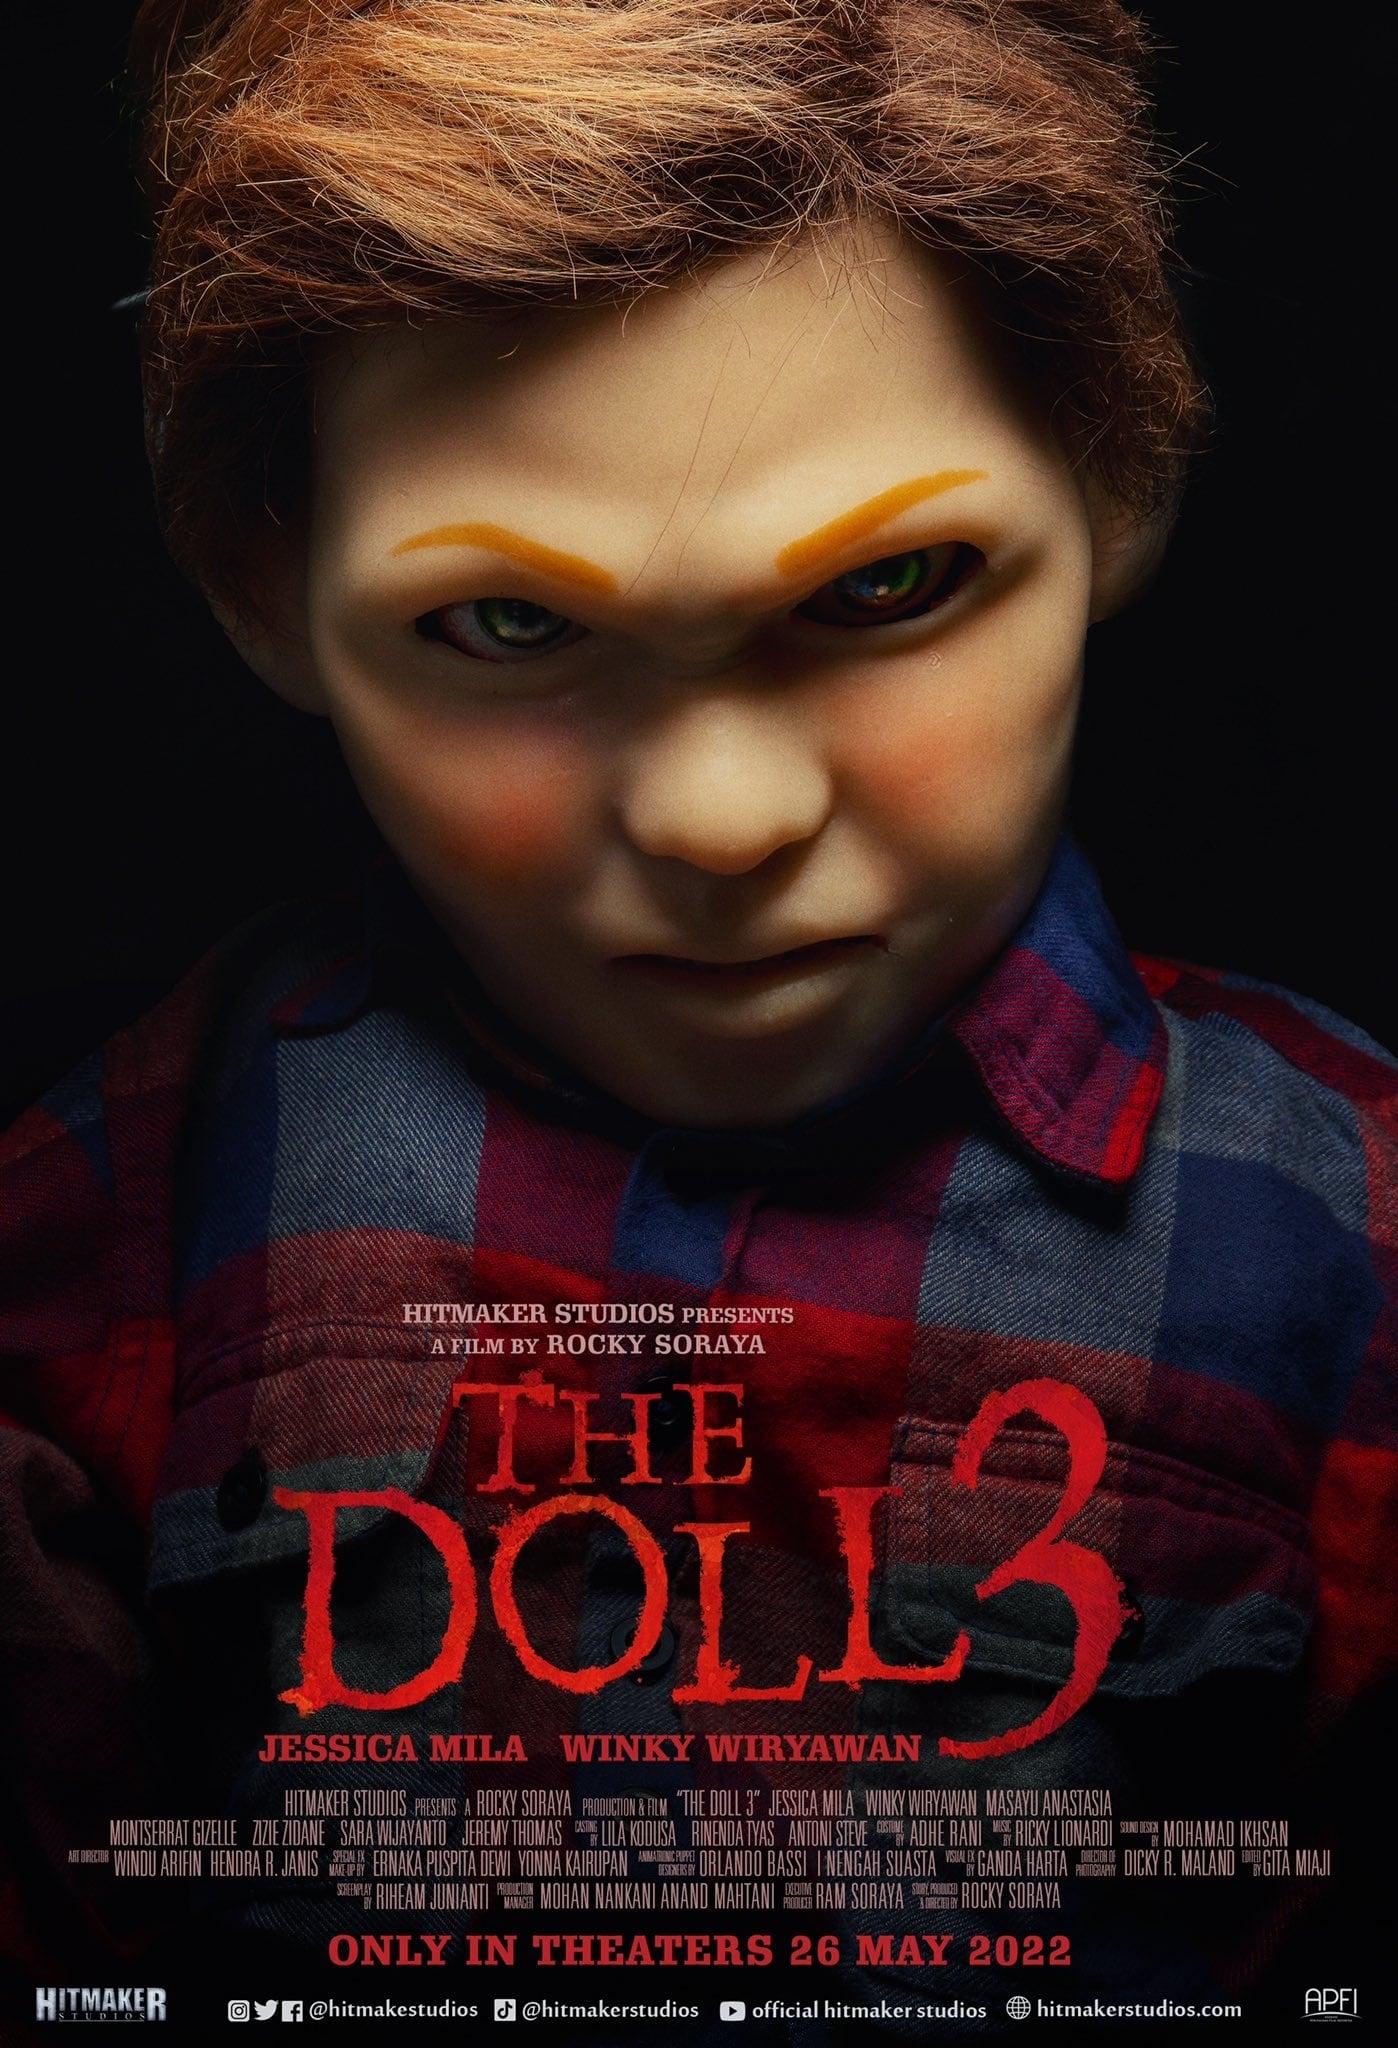 The Doll 3 poster